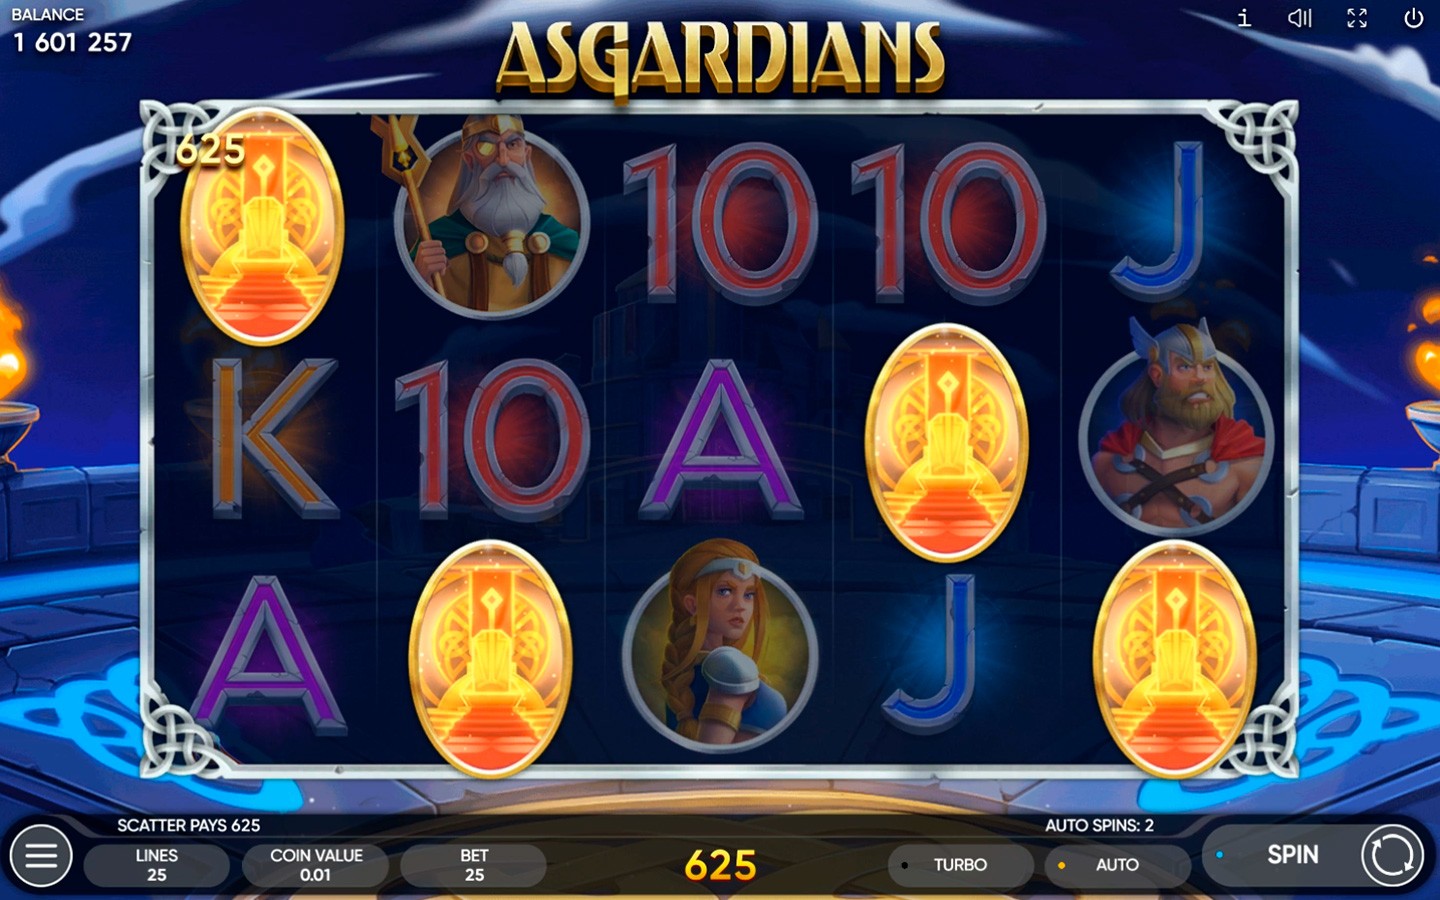 TOP NORDIC SLOT SLOTS OF 2020 | Try Asgardians game online!